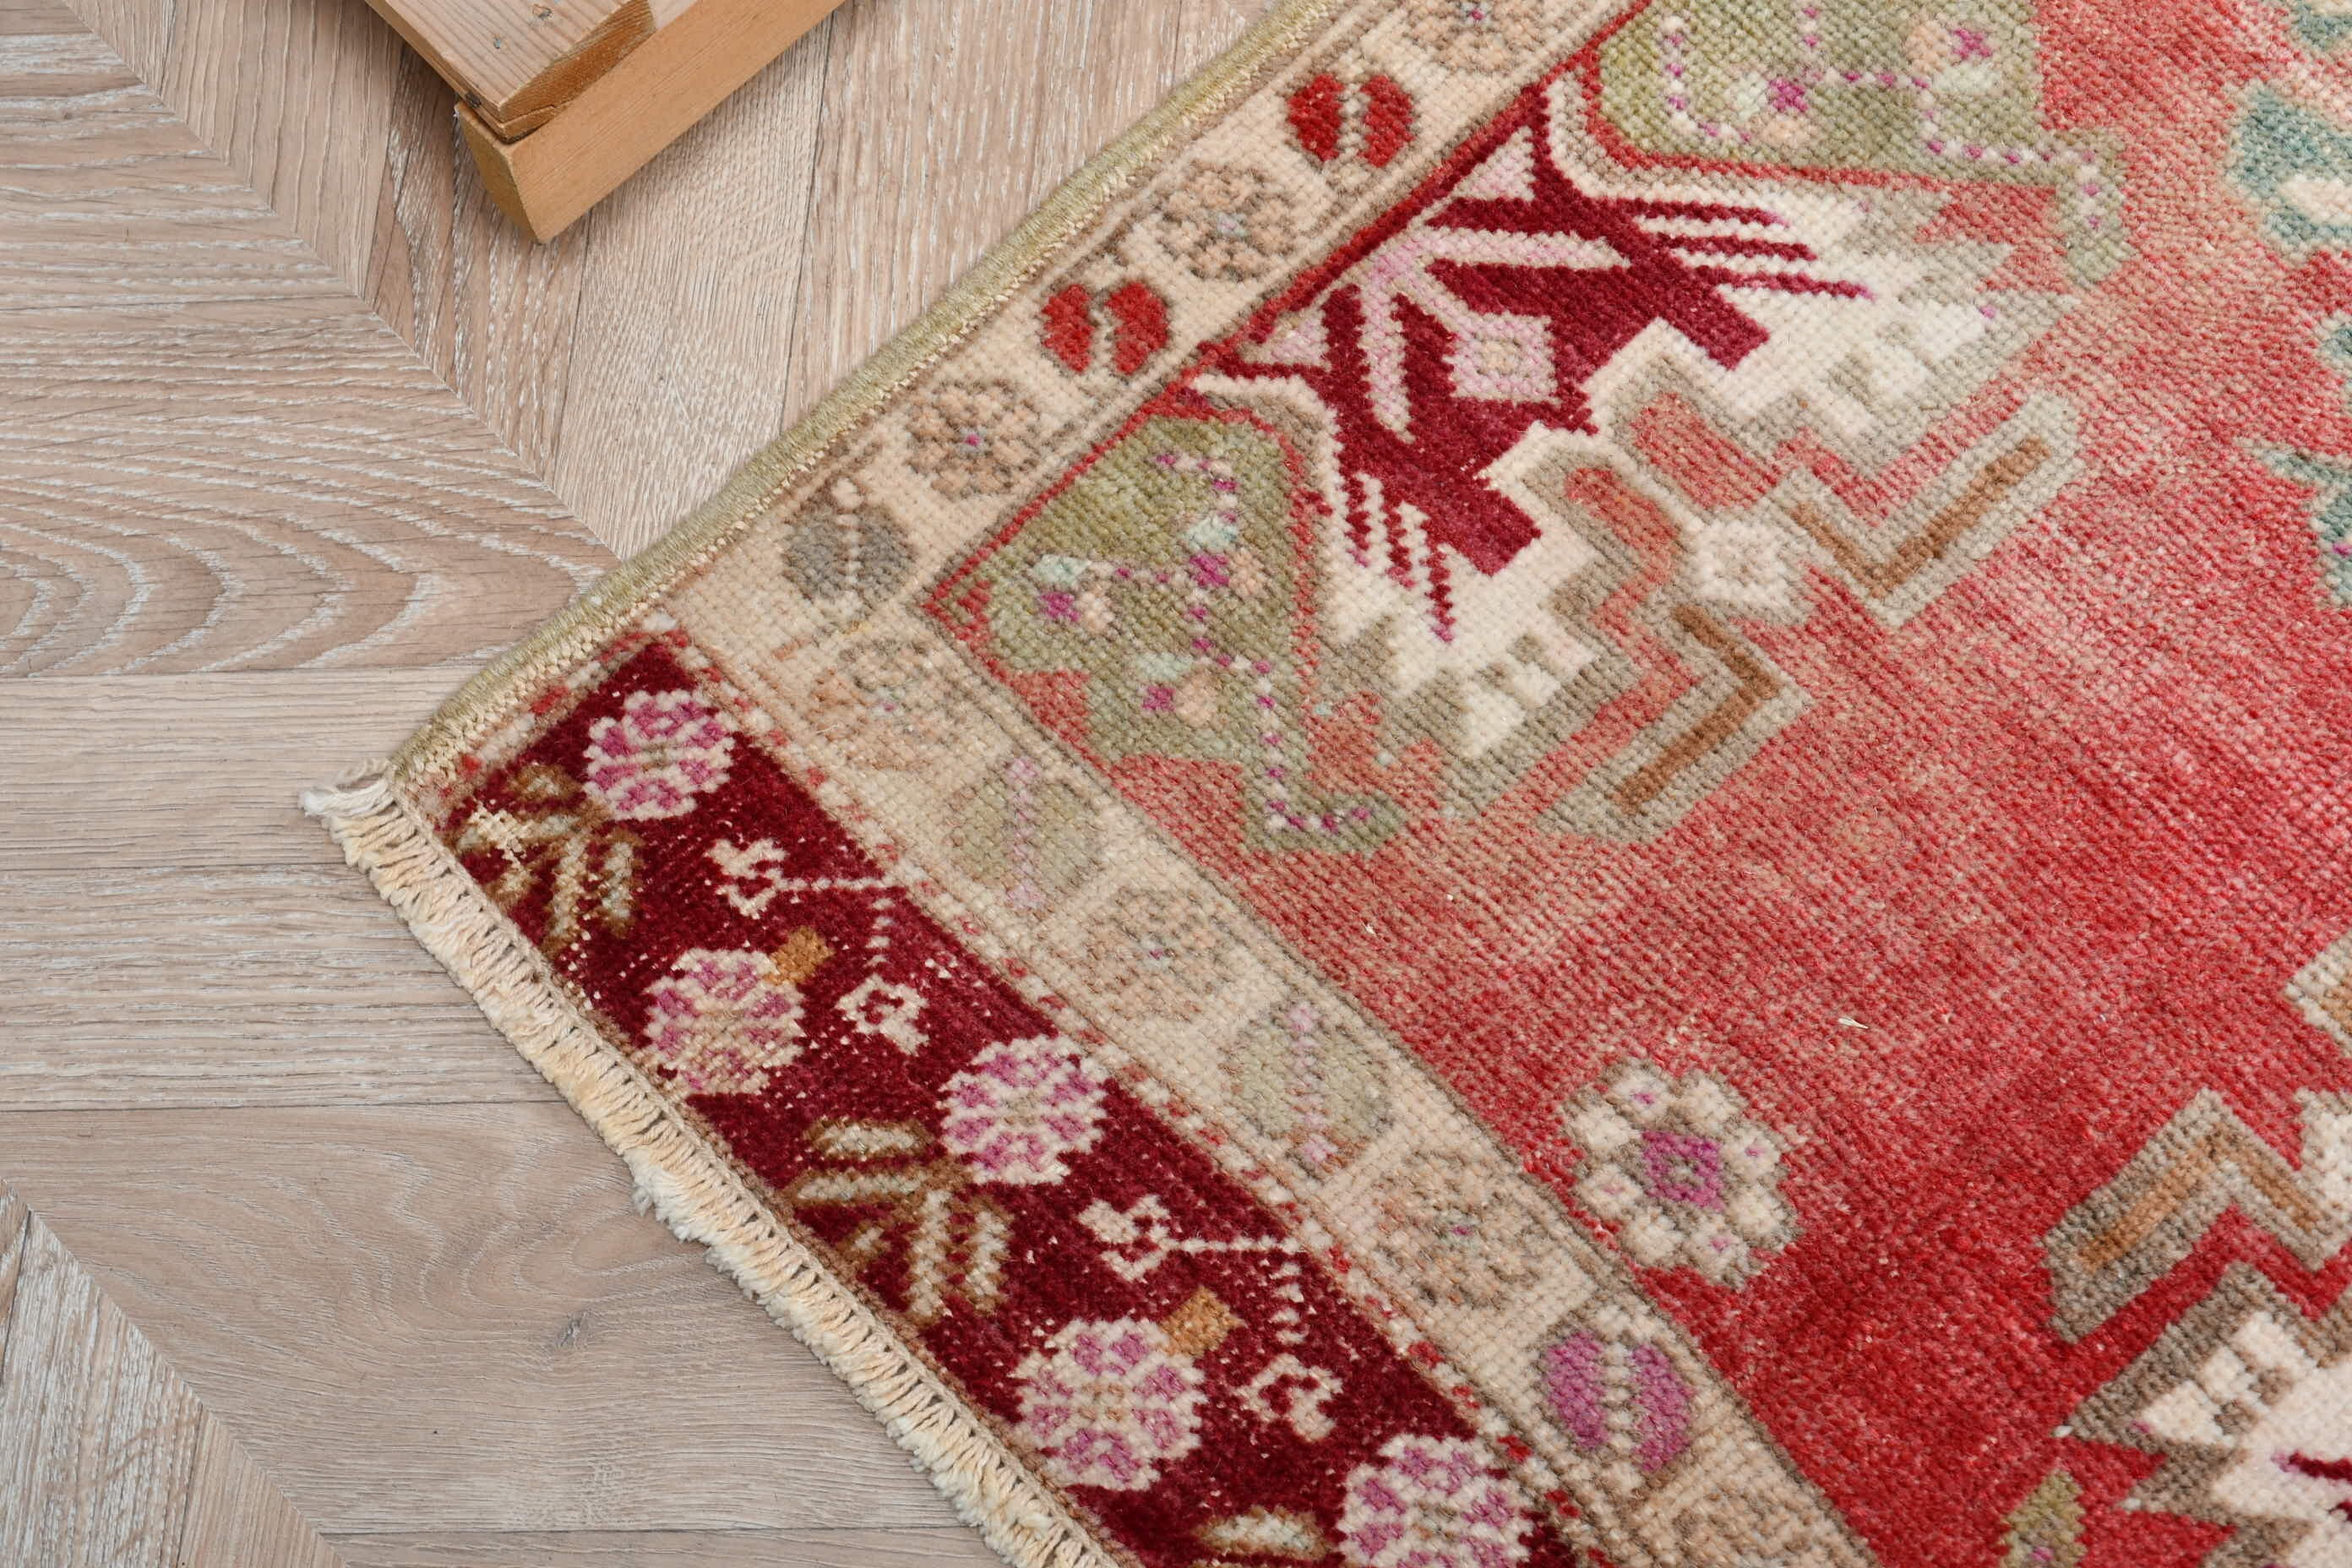 Kitchen Rug, Entry Rugs, Red Oushak Rug, Turkish Rug, 1.8x3.3 ft Small Rug, Rugs for Door Mat, Bedroom Rugs, Oushak Rugs, Vintage Rug